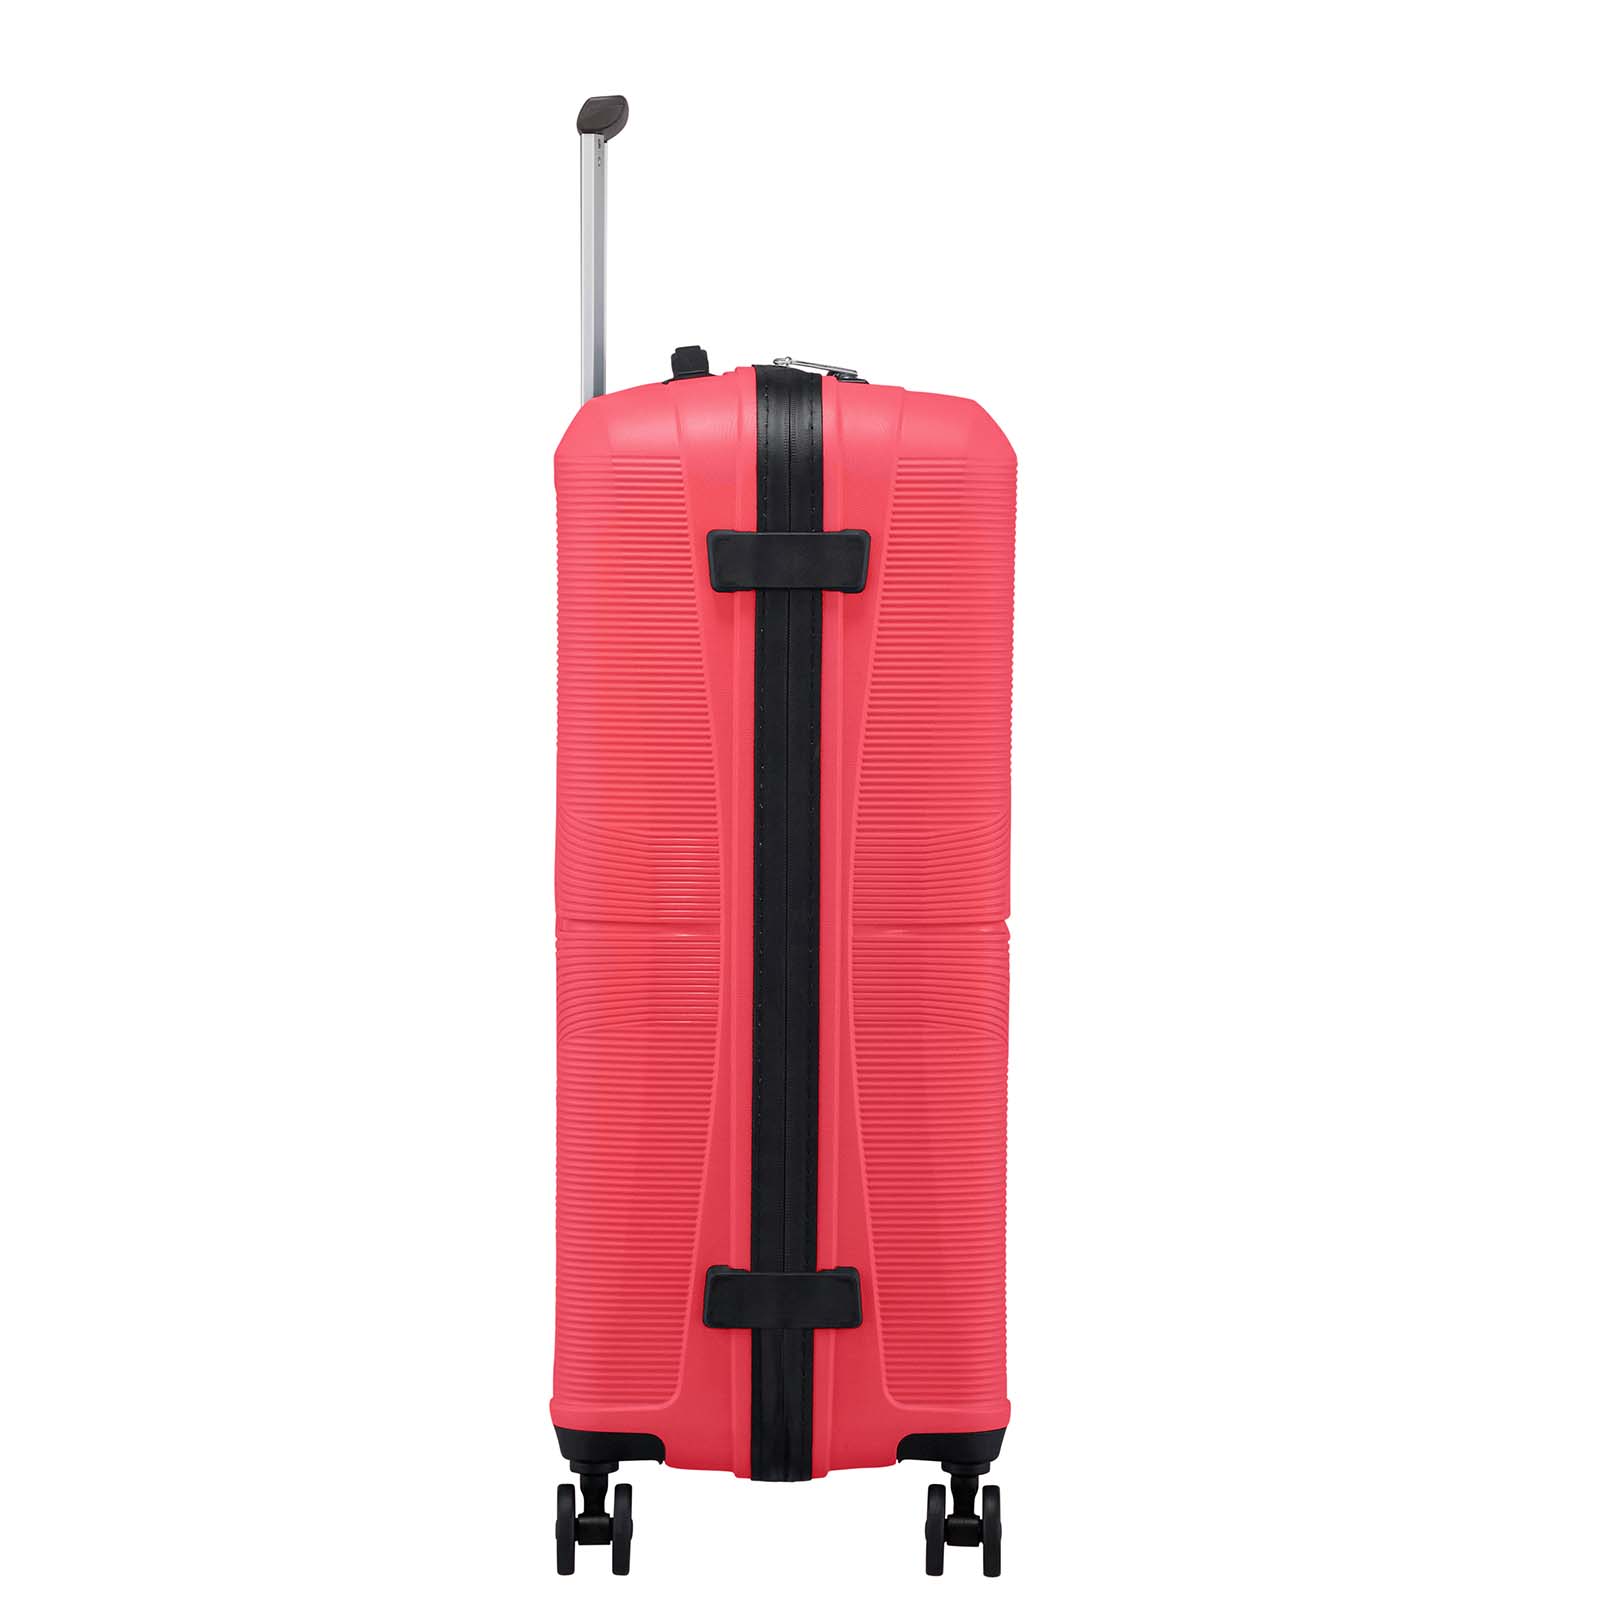 American-Tourister-Airconic-67cm-Suitcase-Paradise-Pink-Hinge